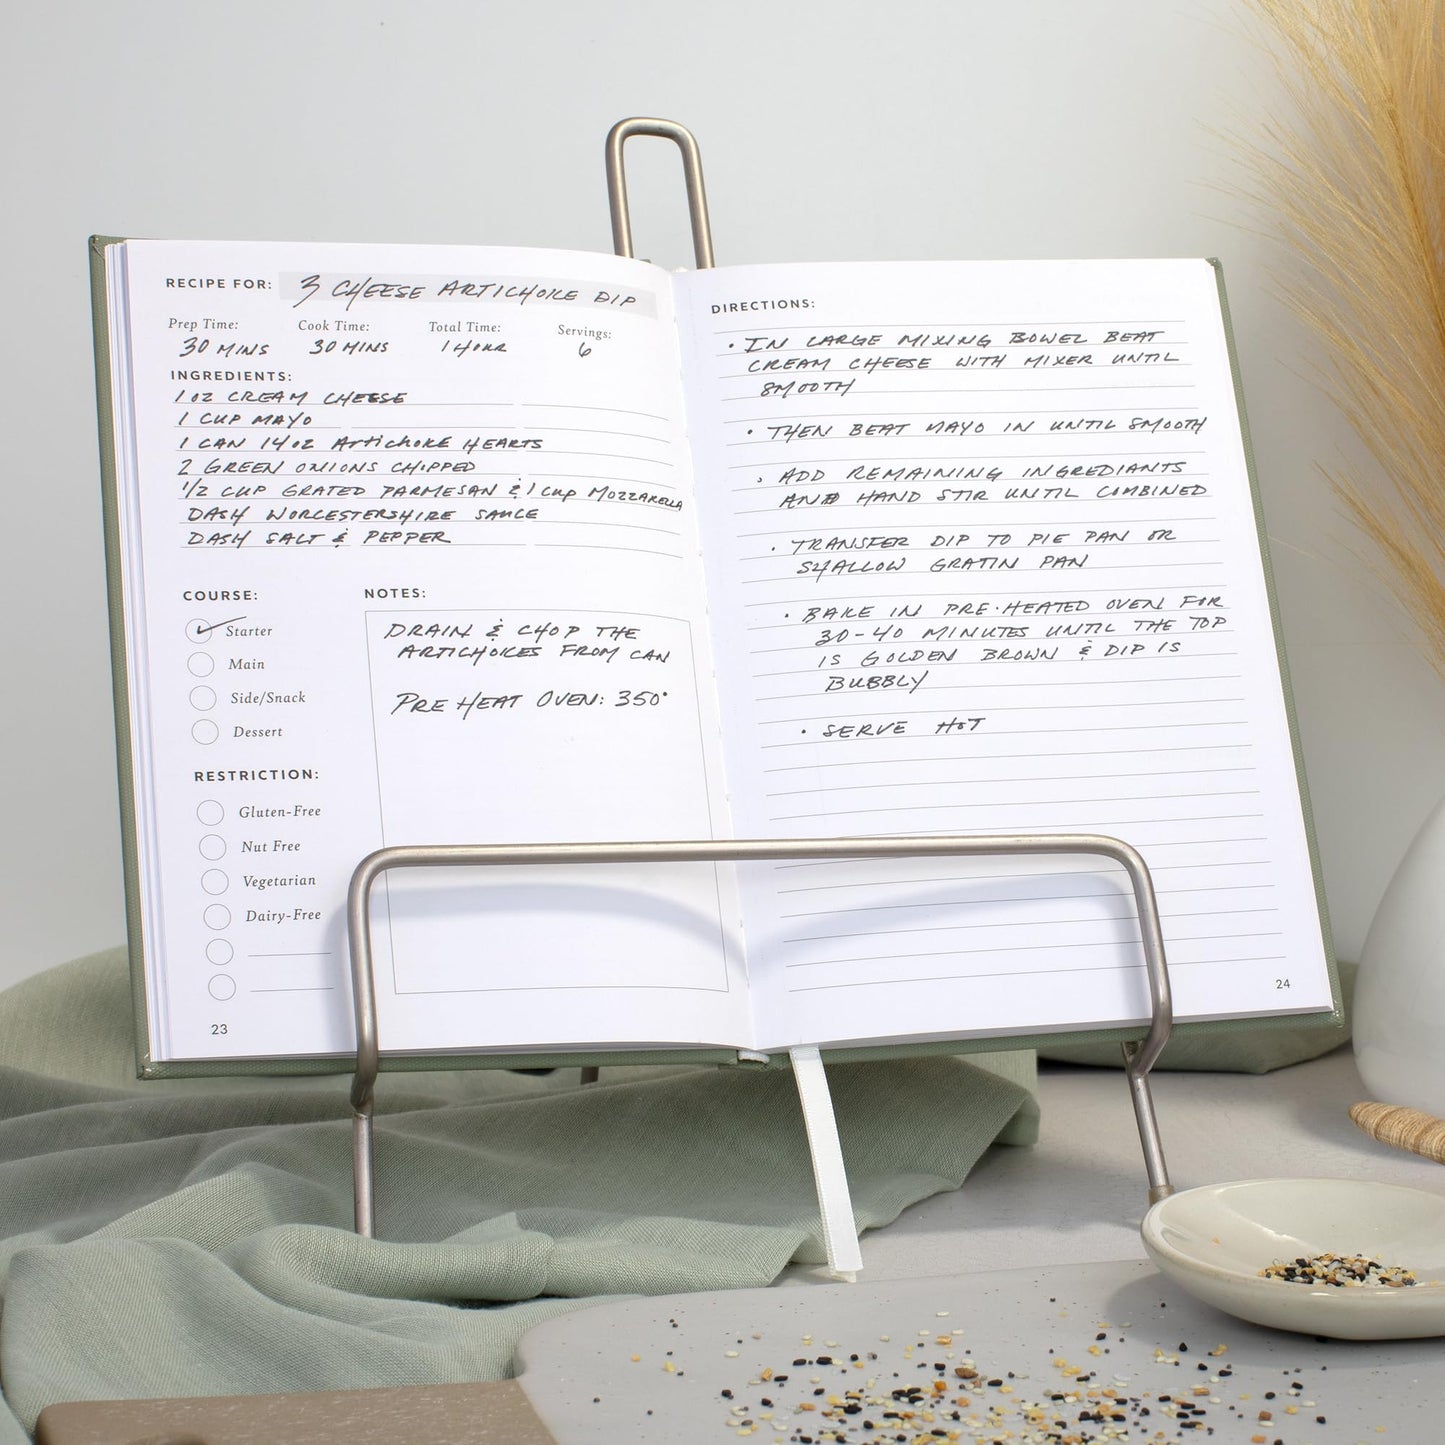 Aesthetic Blank Recipe Book with Waterproof Cover - The Perfect Recipe Notebook To Write In Your Own Recipes - Simplified Blank Cookbook to Organize Your Recipes